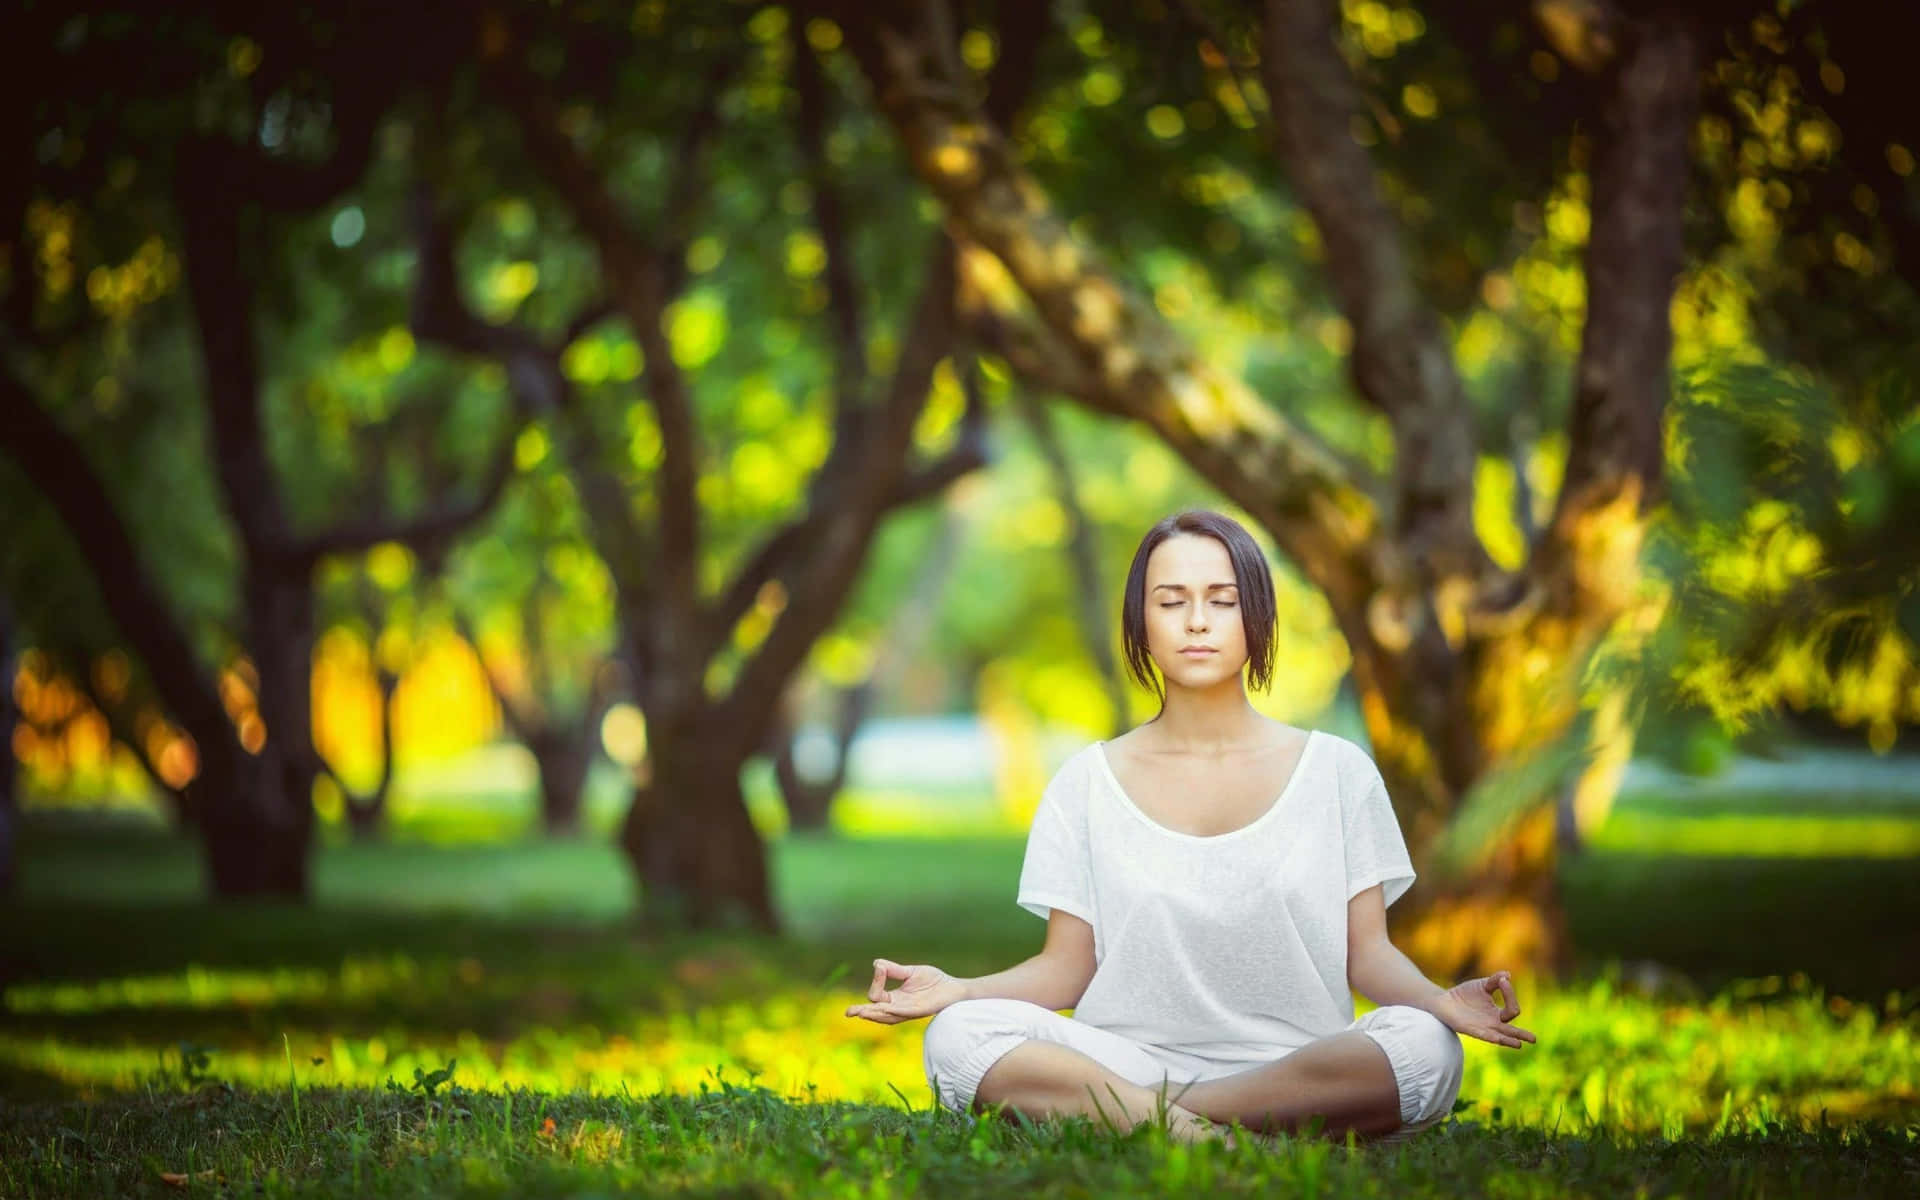 Woman Meditating In The Park